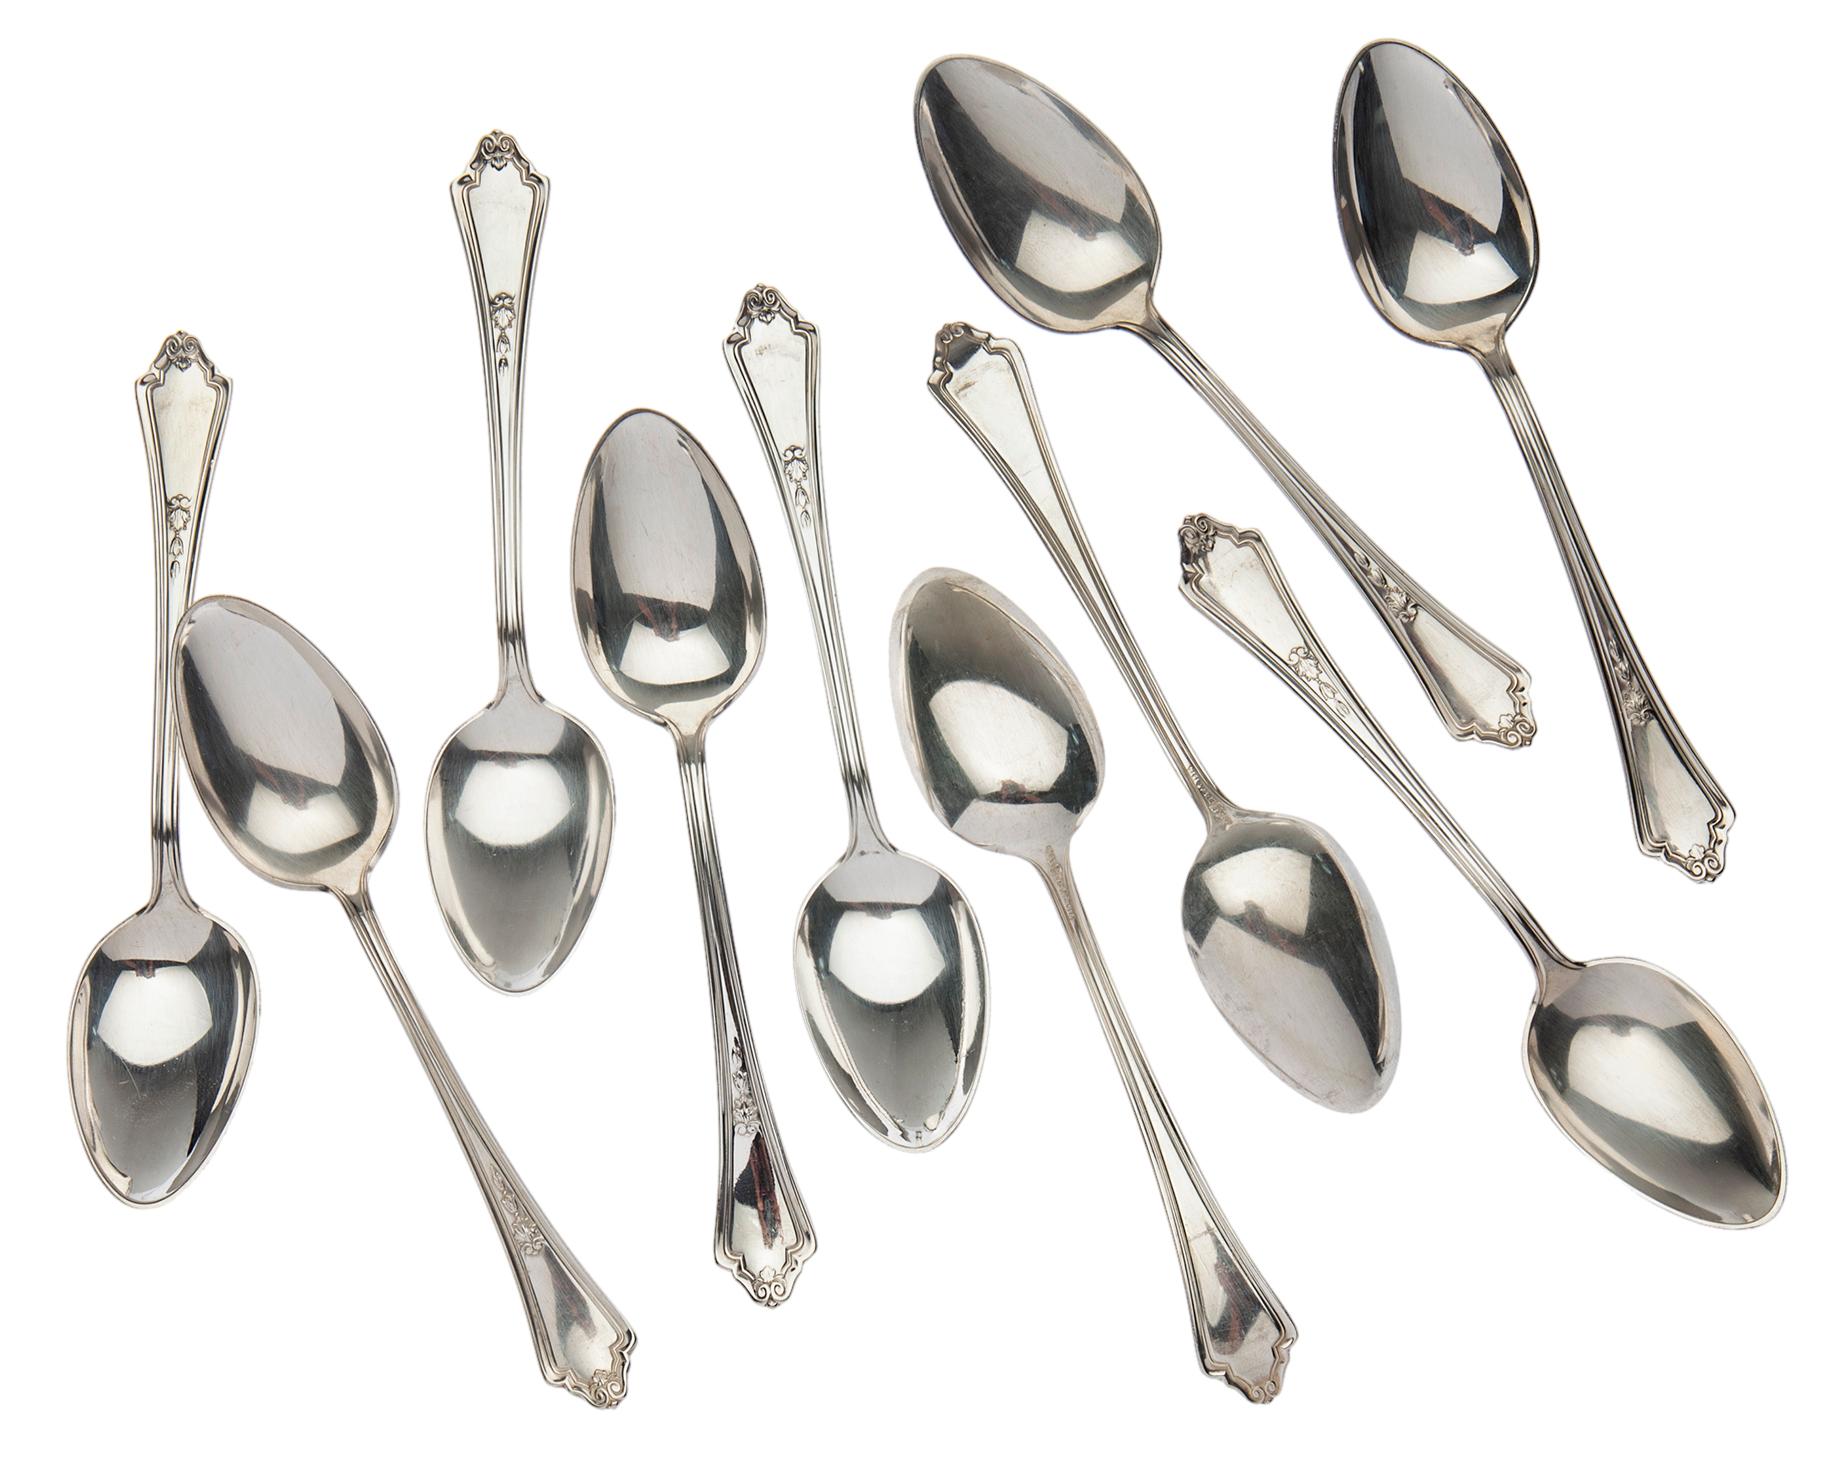 Gorham Teaspoons in Shelburne Pattern; Set/10 In Good Condition For Sale In Malibu, CA